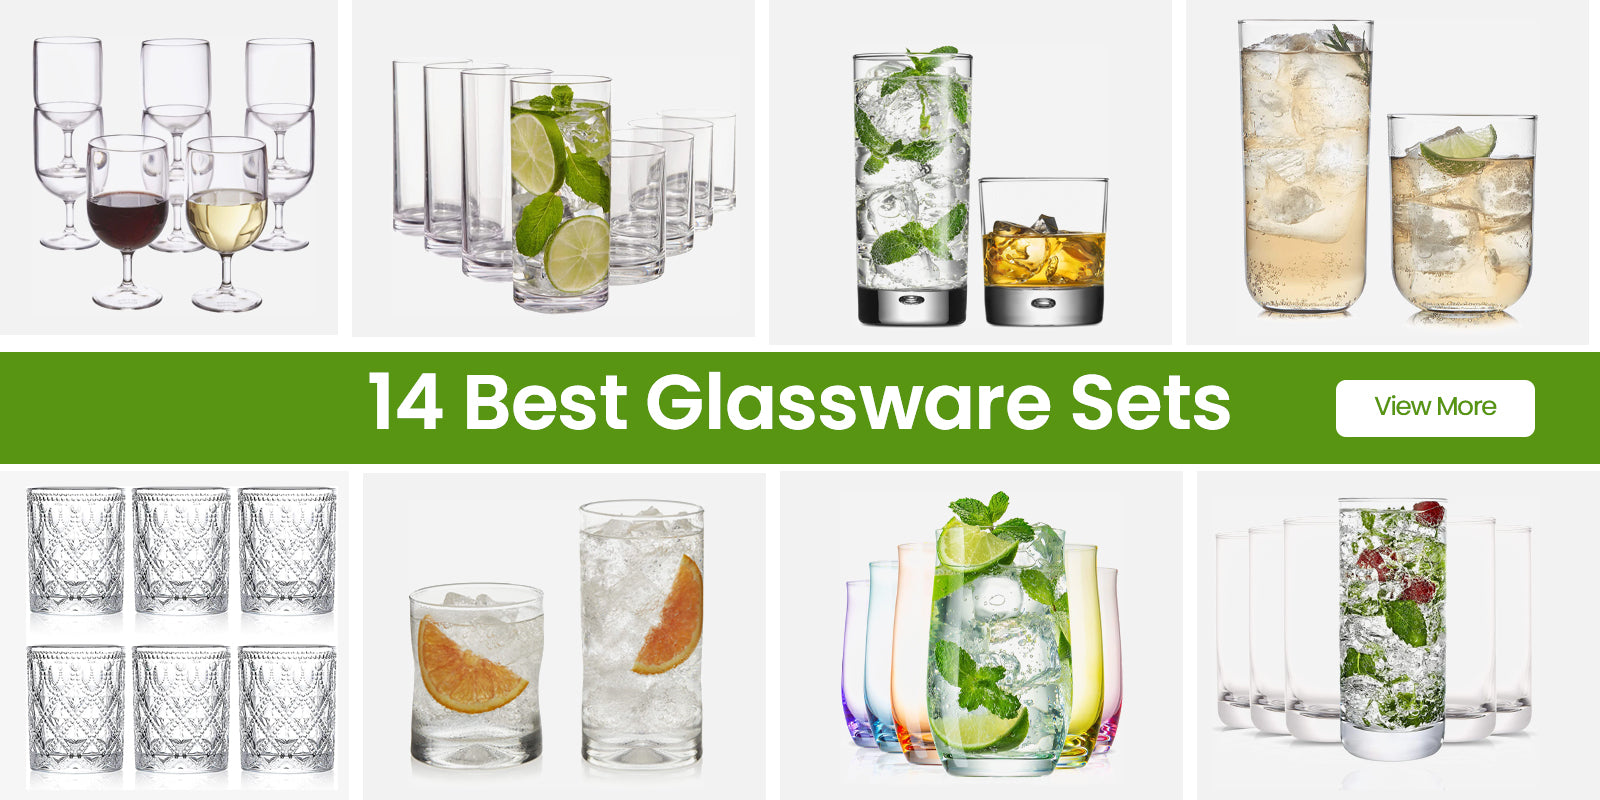 20+ Chic & Festive Holiday Glassware Options – Perfect for Toasting!